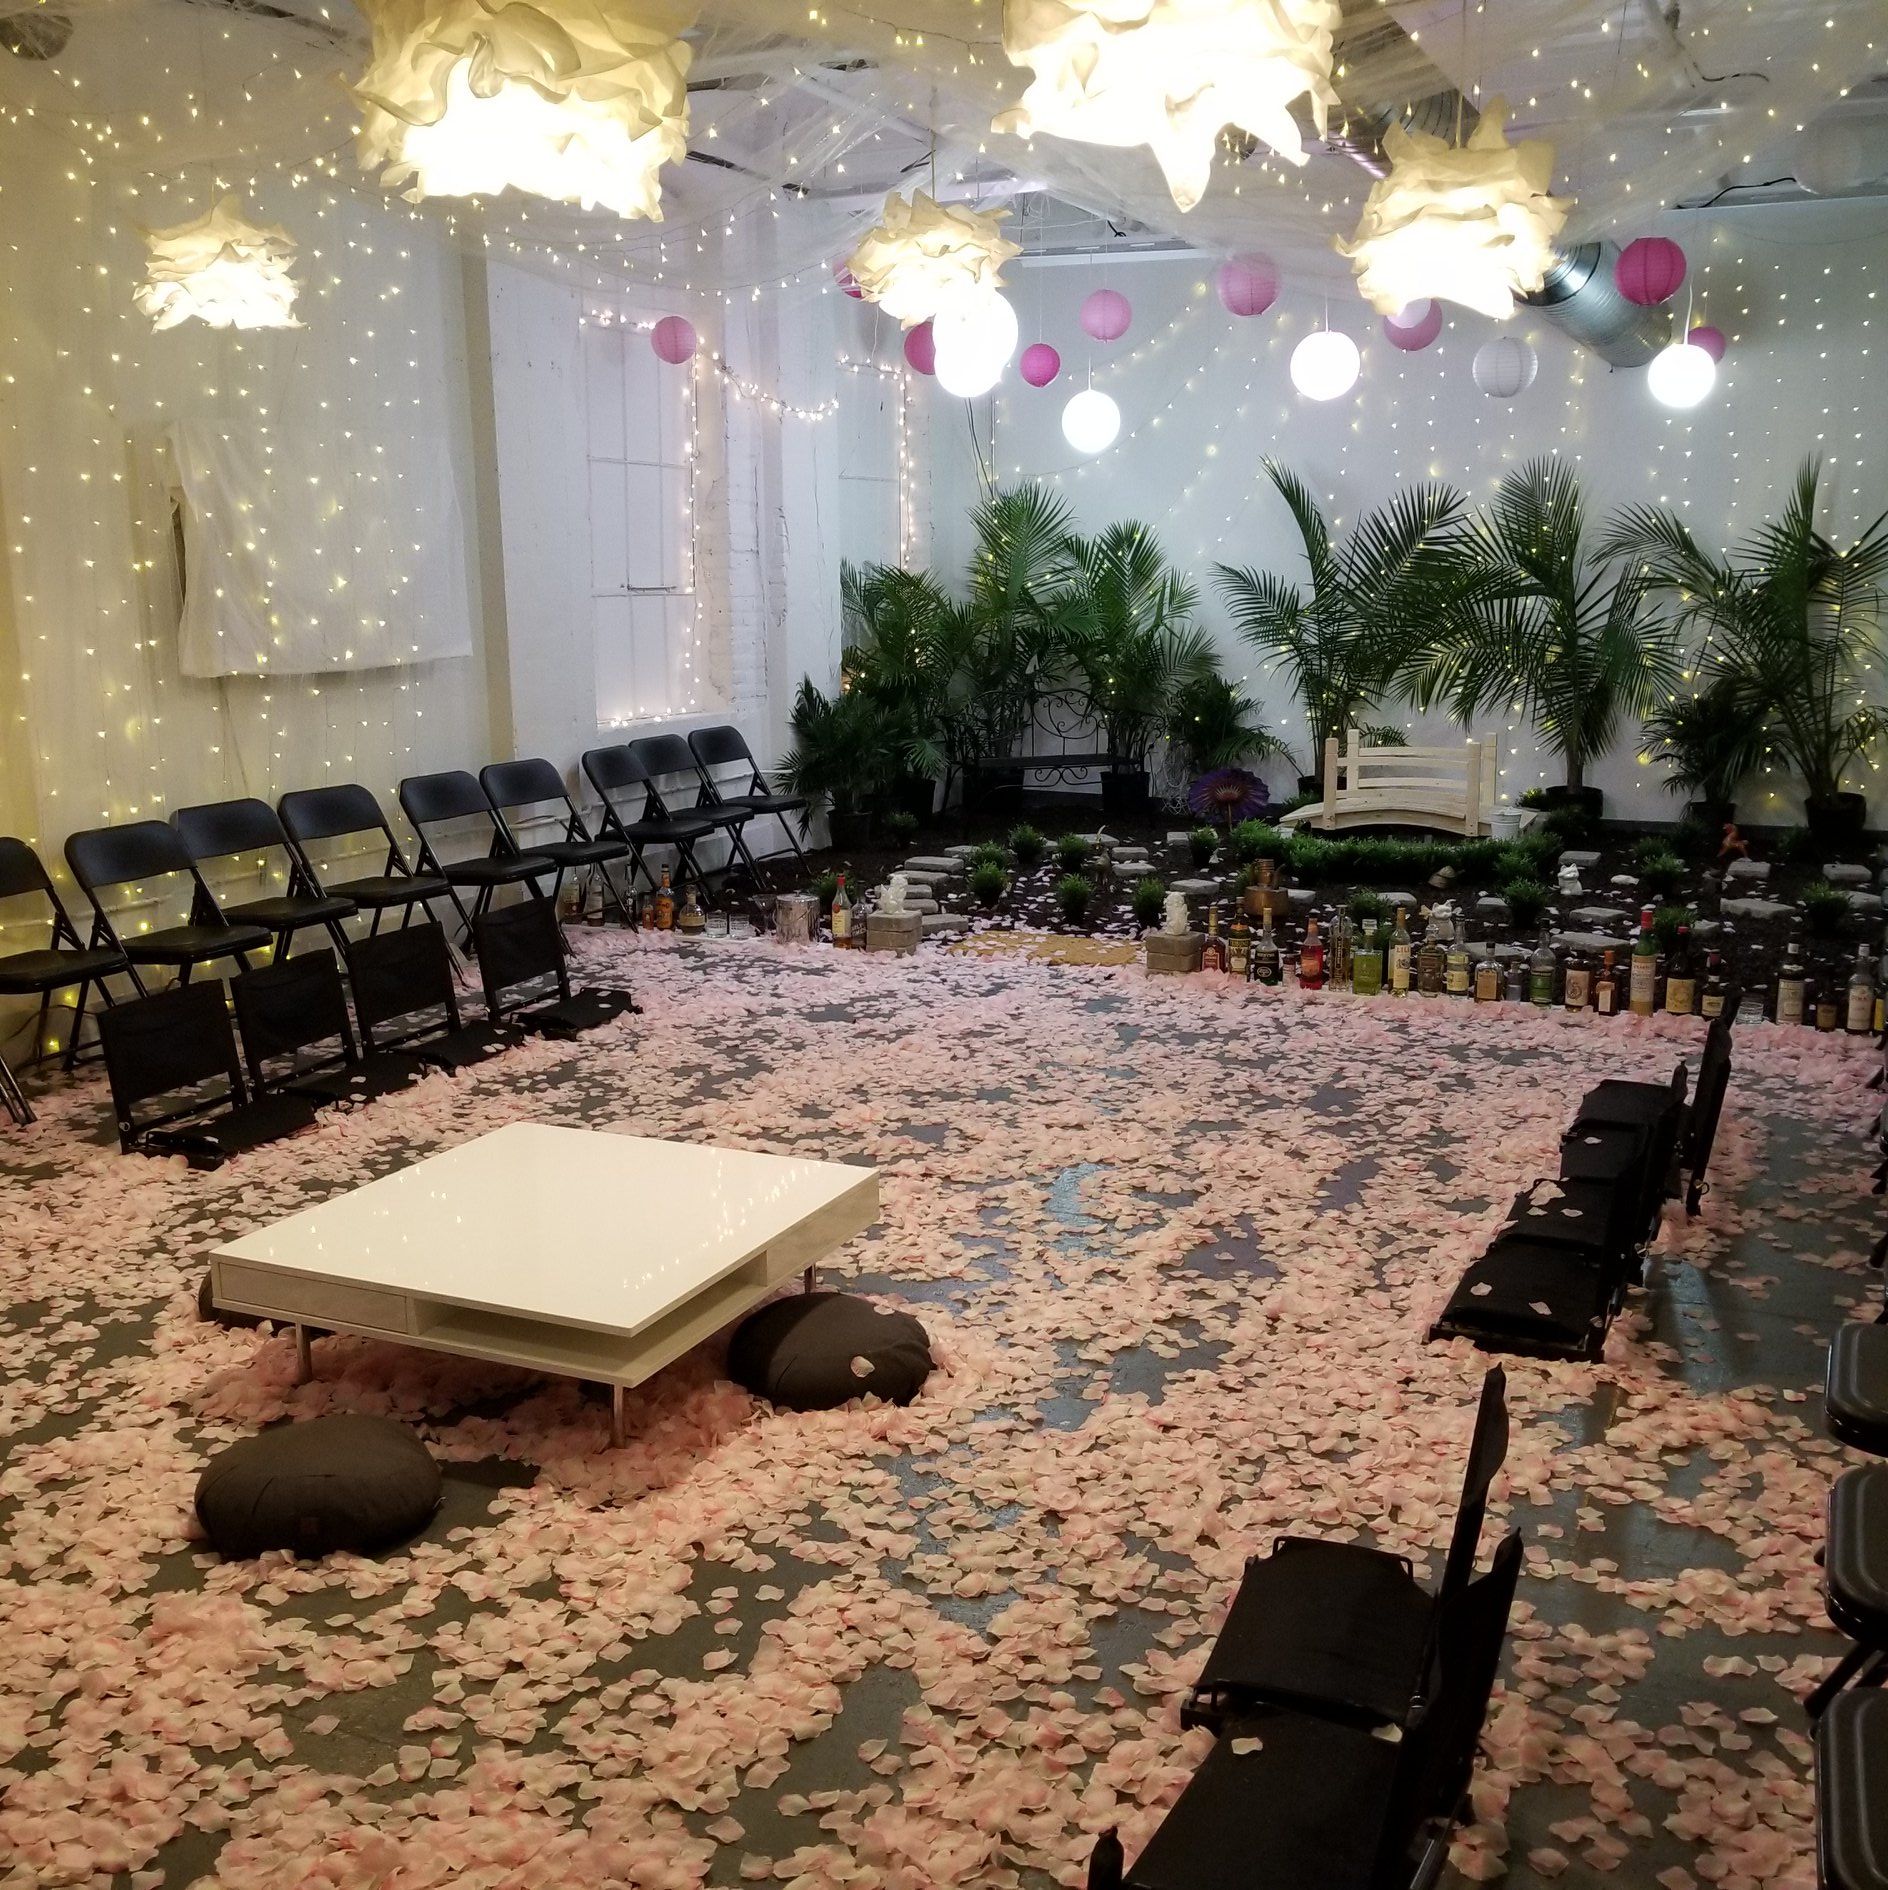 Room with chairs decorated with lights, balloons, small trees, candles, and flower petals all over the floor.